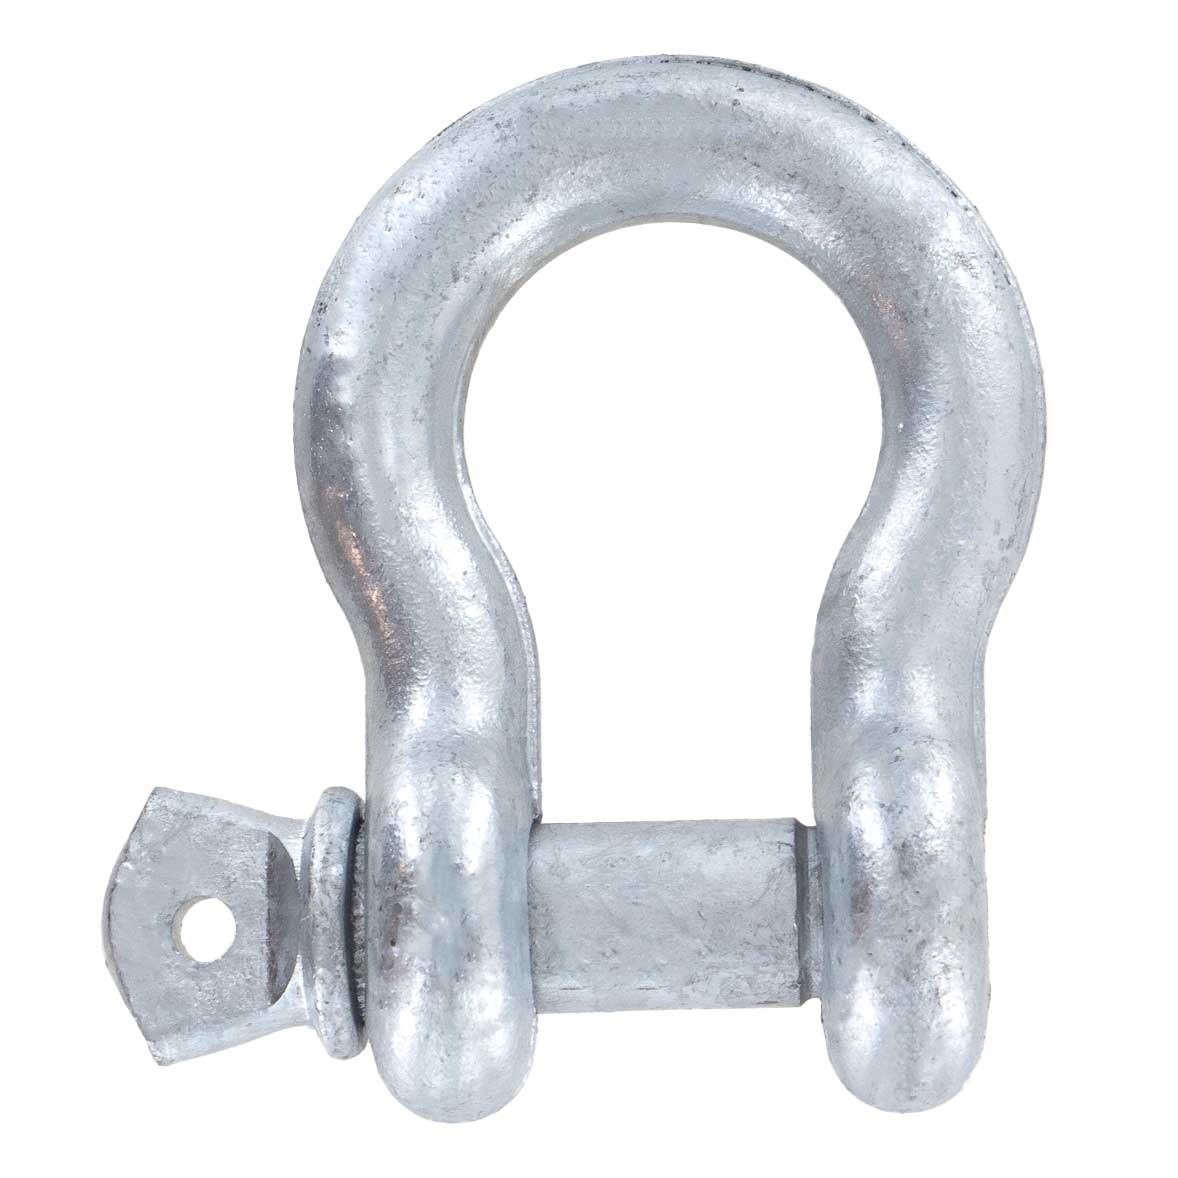 5/16" Galvanized Screw Pin Anchor Shackle - 0.75 Ton rear view